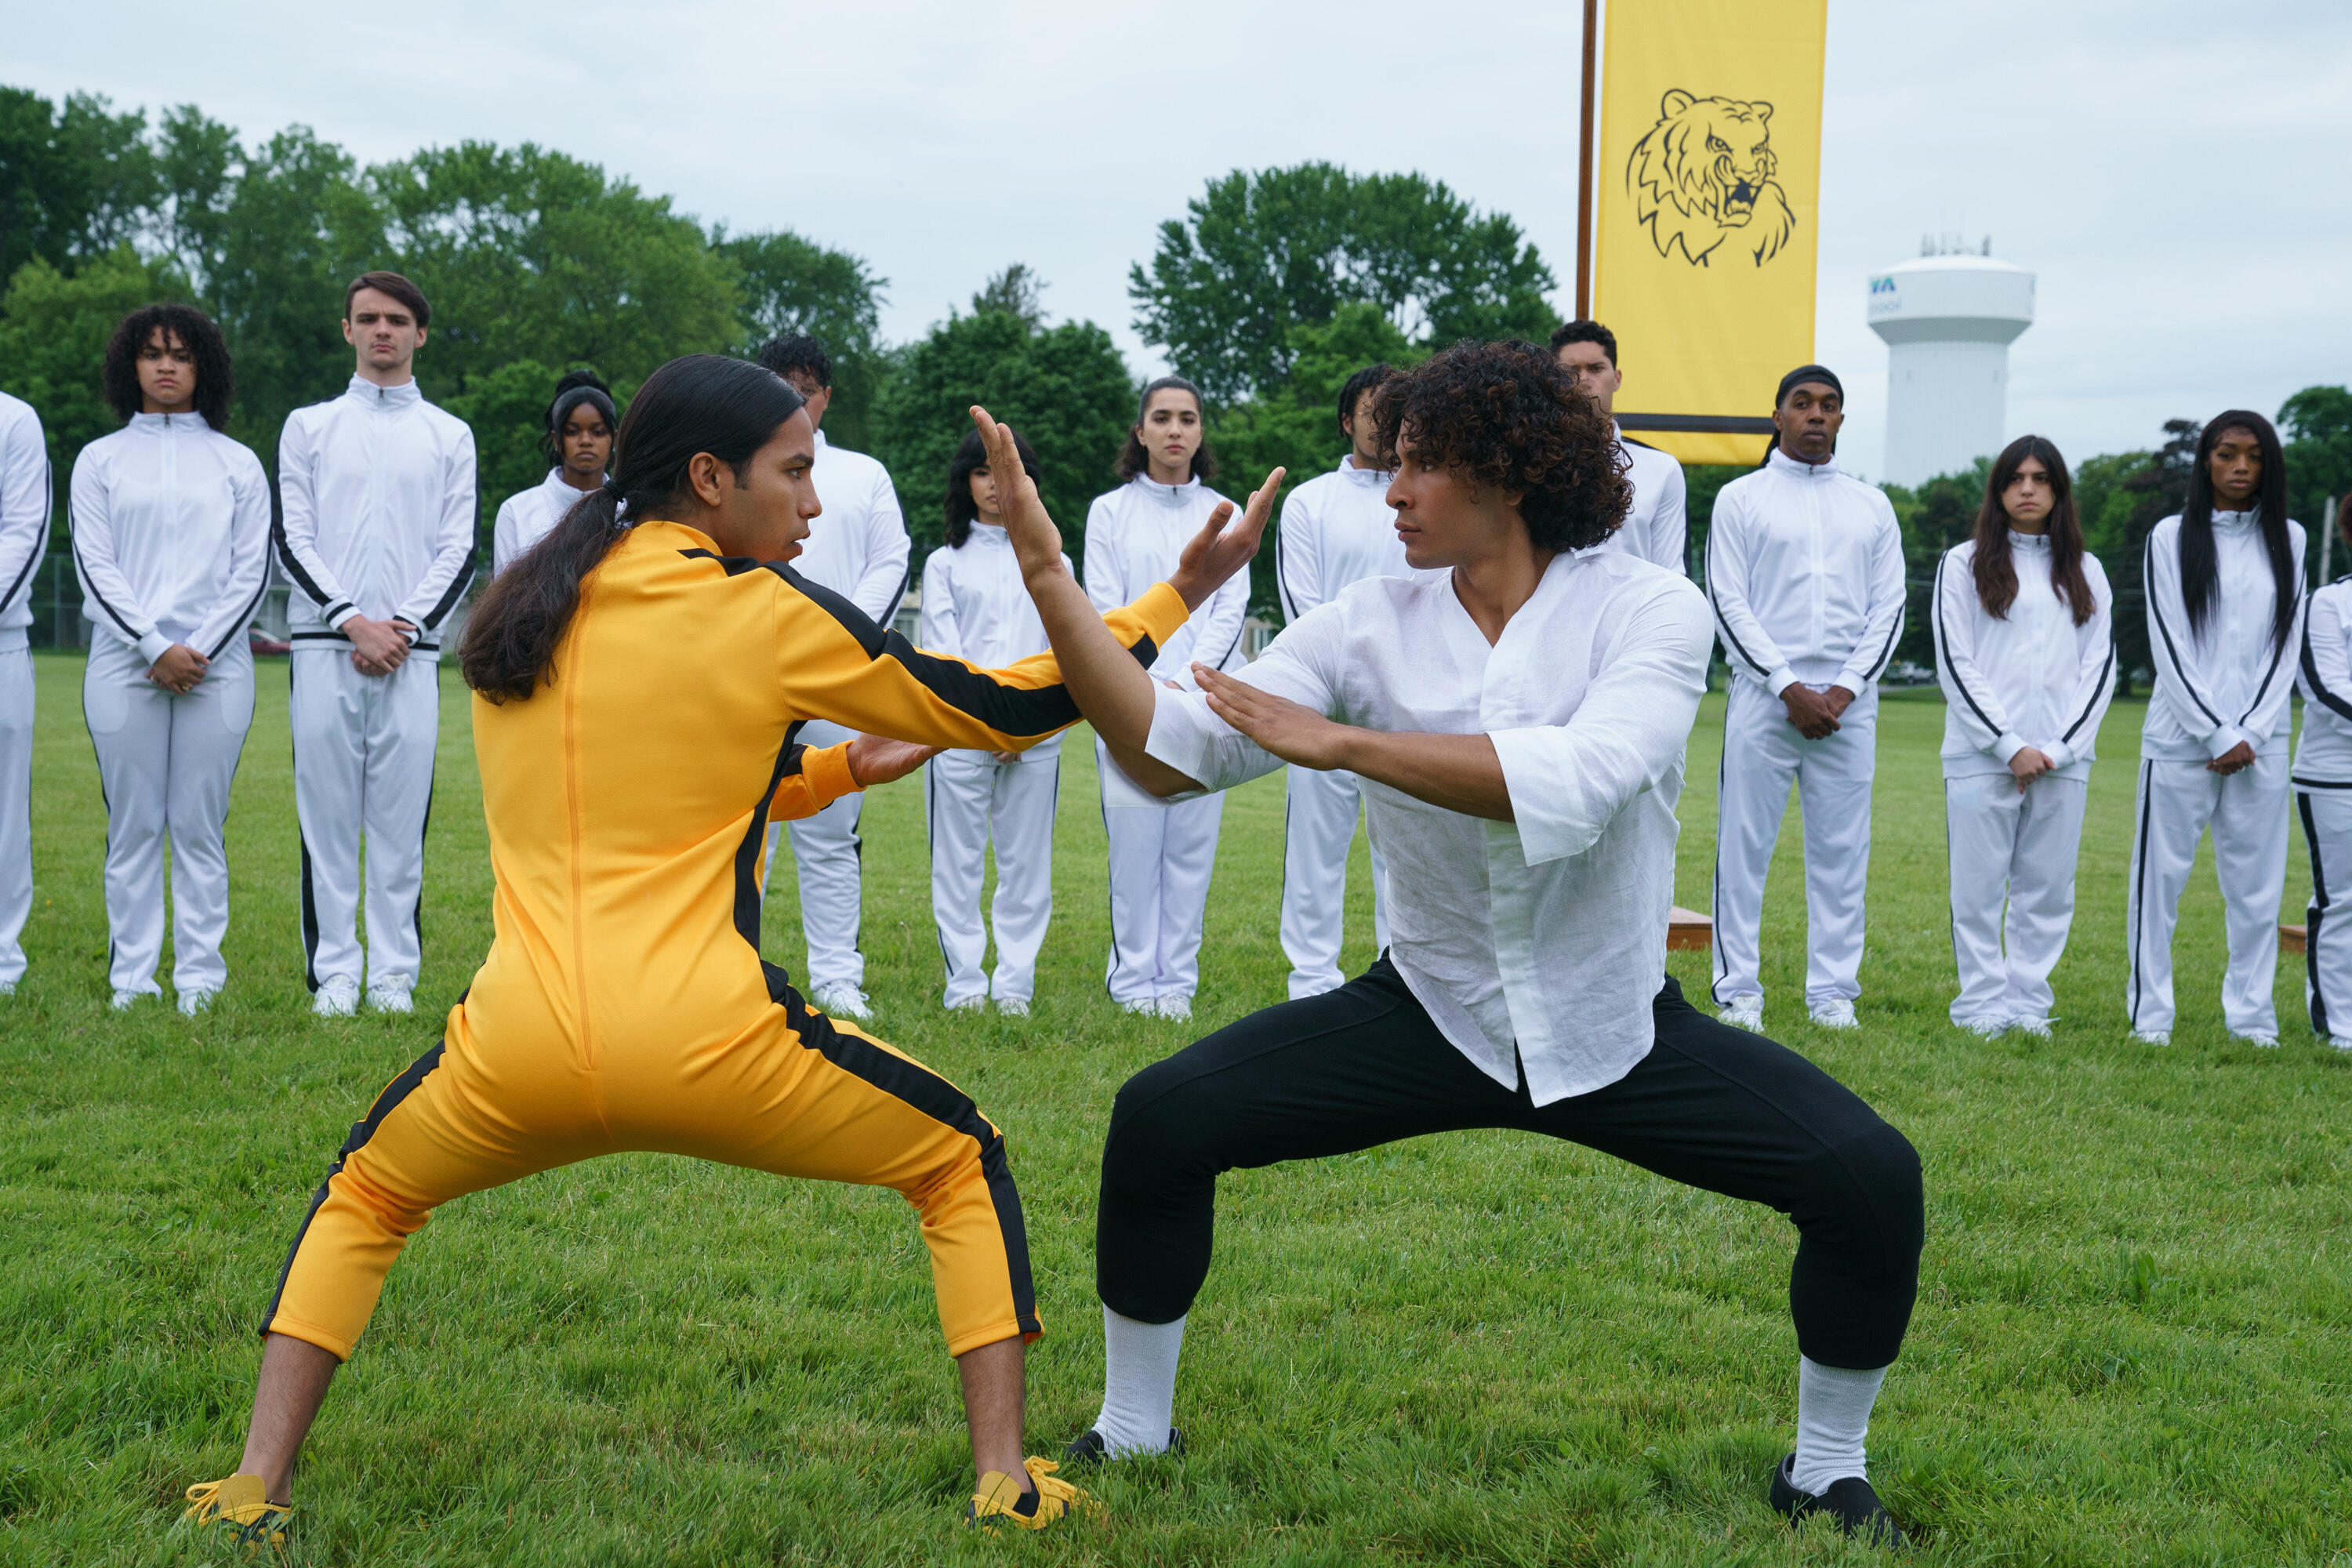 Miguel, dressed in Bruce Lee’s yellow jumpsuit from Game of Death, stands in a martial arts pose at the ready, crossing arms with his opponent in a white shirt and black pants as a row of other teens in white look on in the Hulu Comedy Miguel Wants to Fight